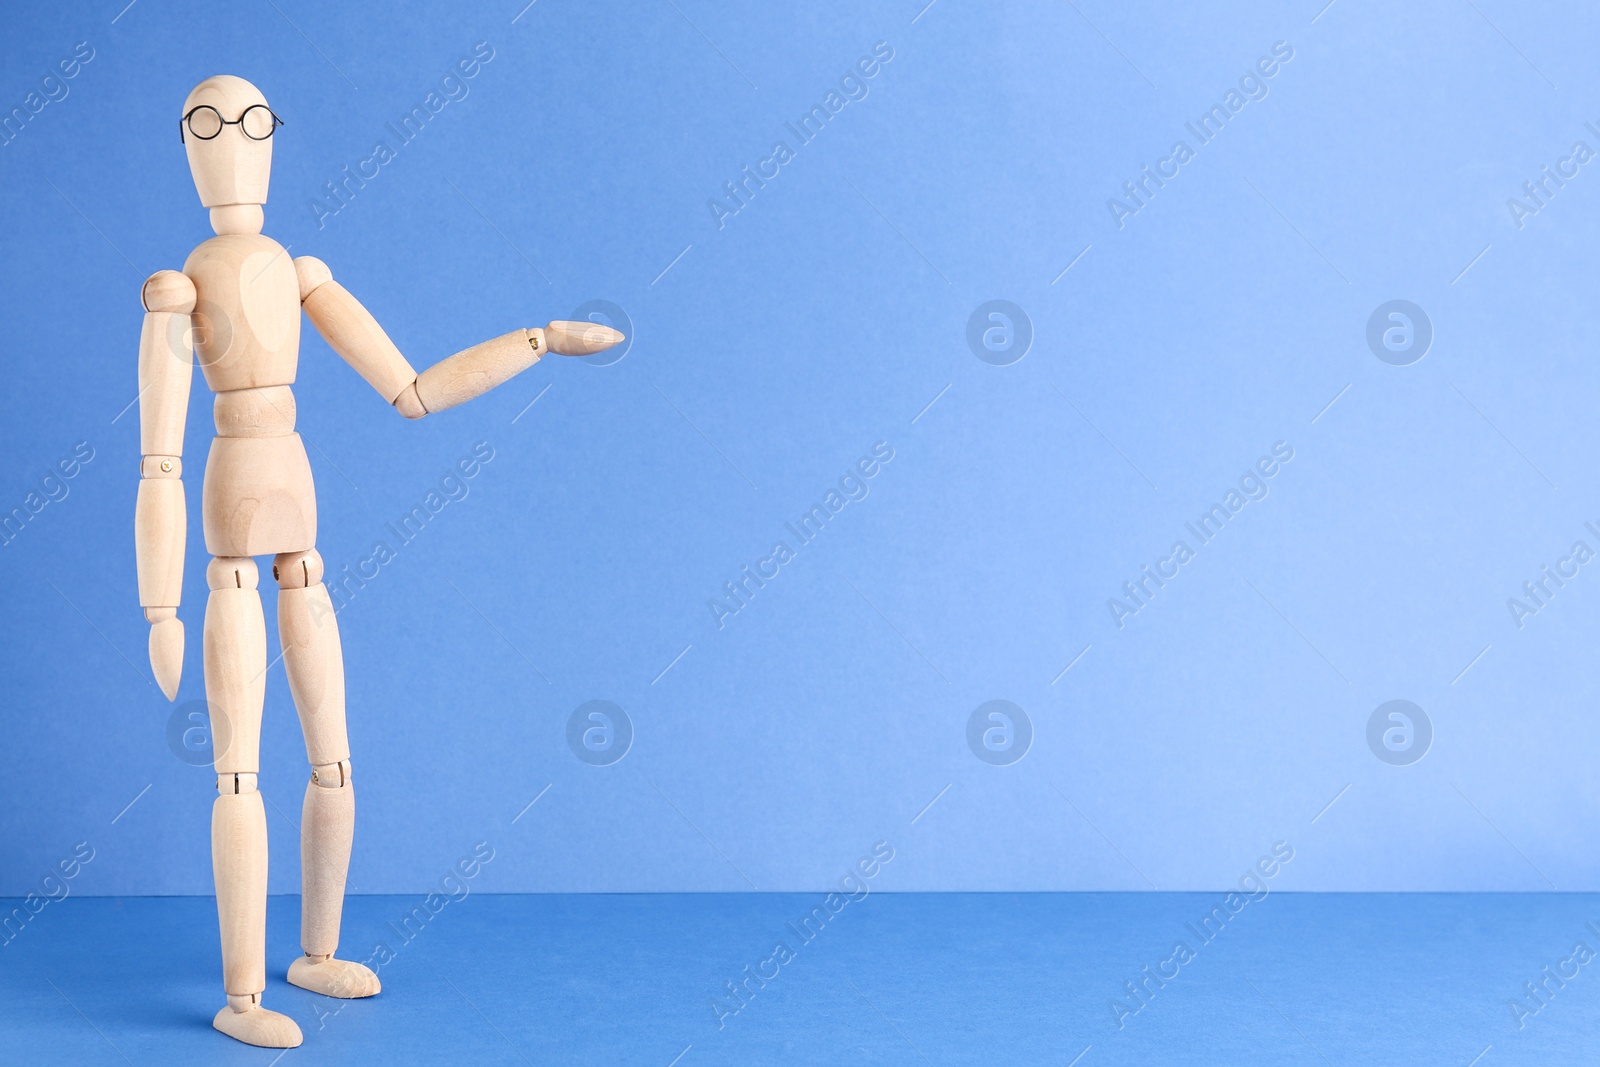 Photo of Wooden human figure in eyeglasses against light blue background, space for text